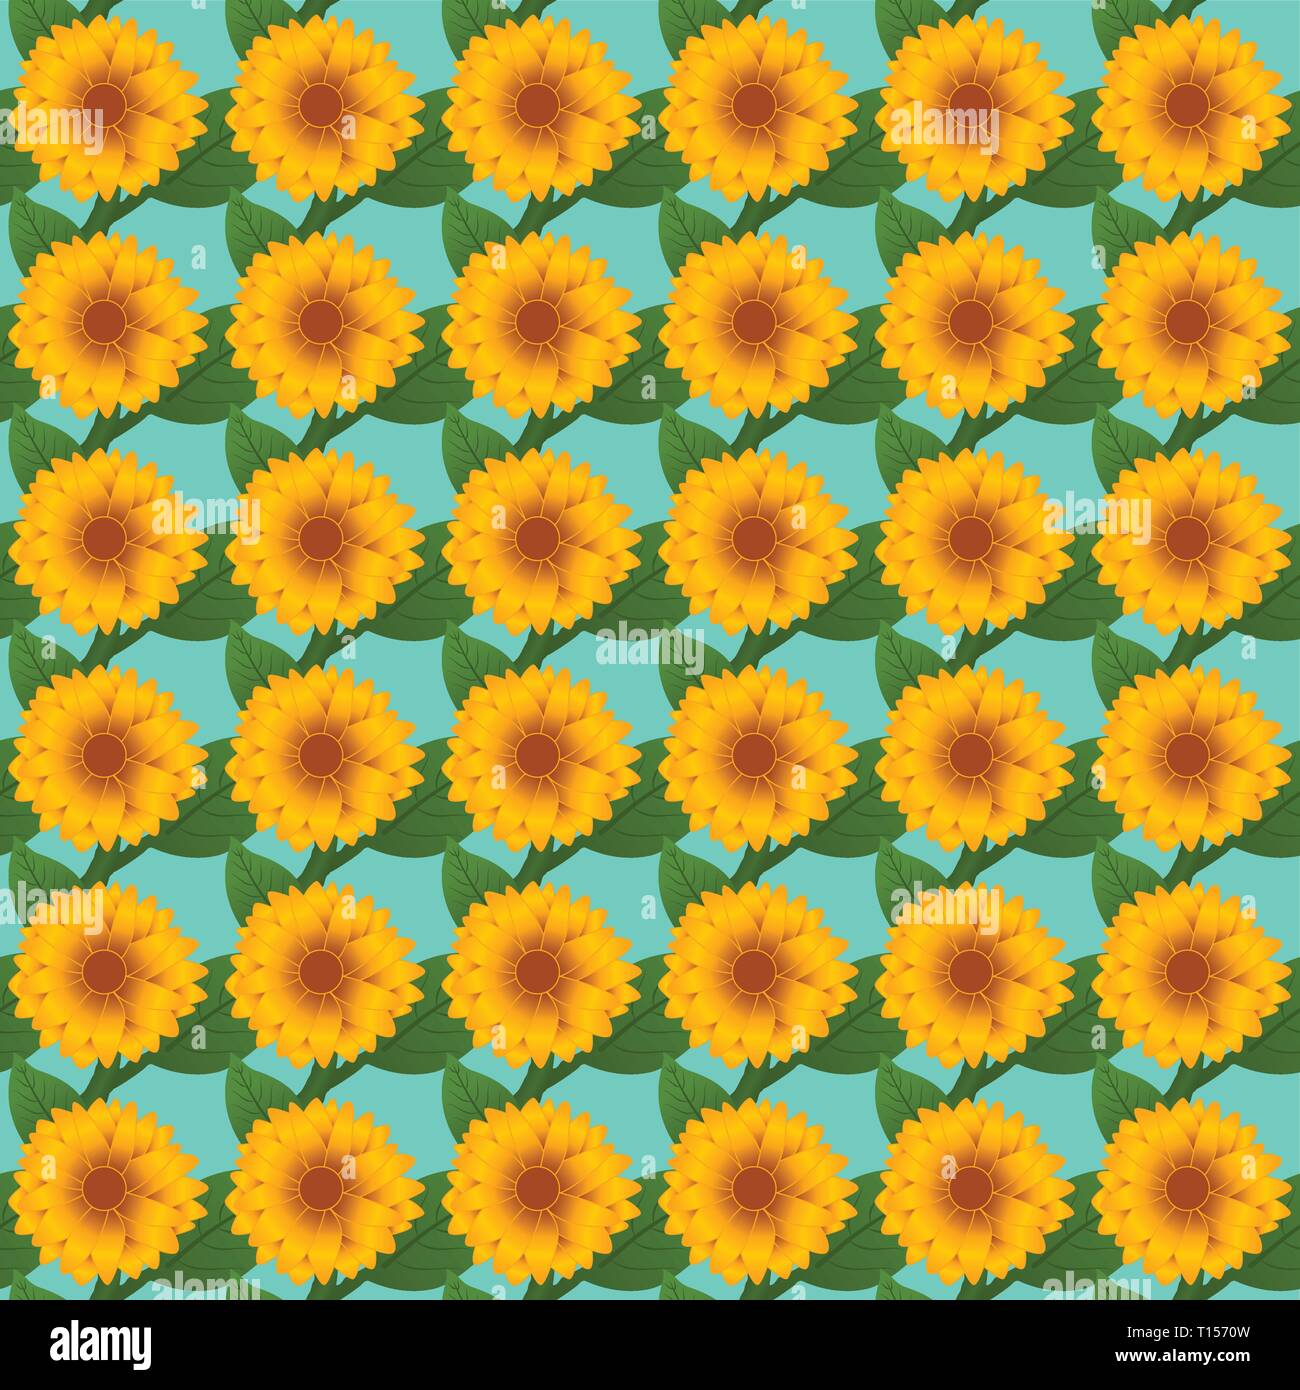 Sunflower seamless vector pattern for Postcards, wallpaper, web background, Print and fabric Stock Vector